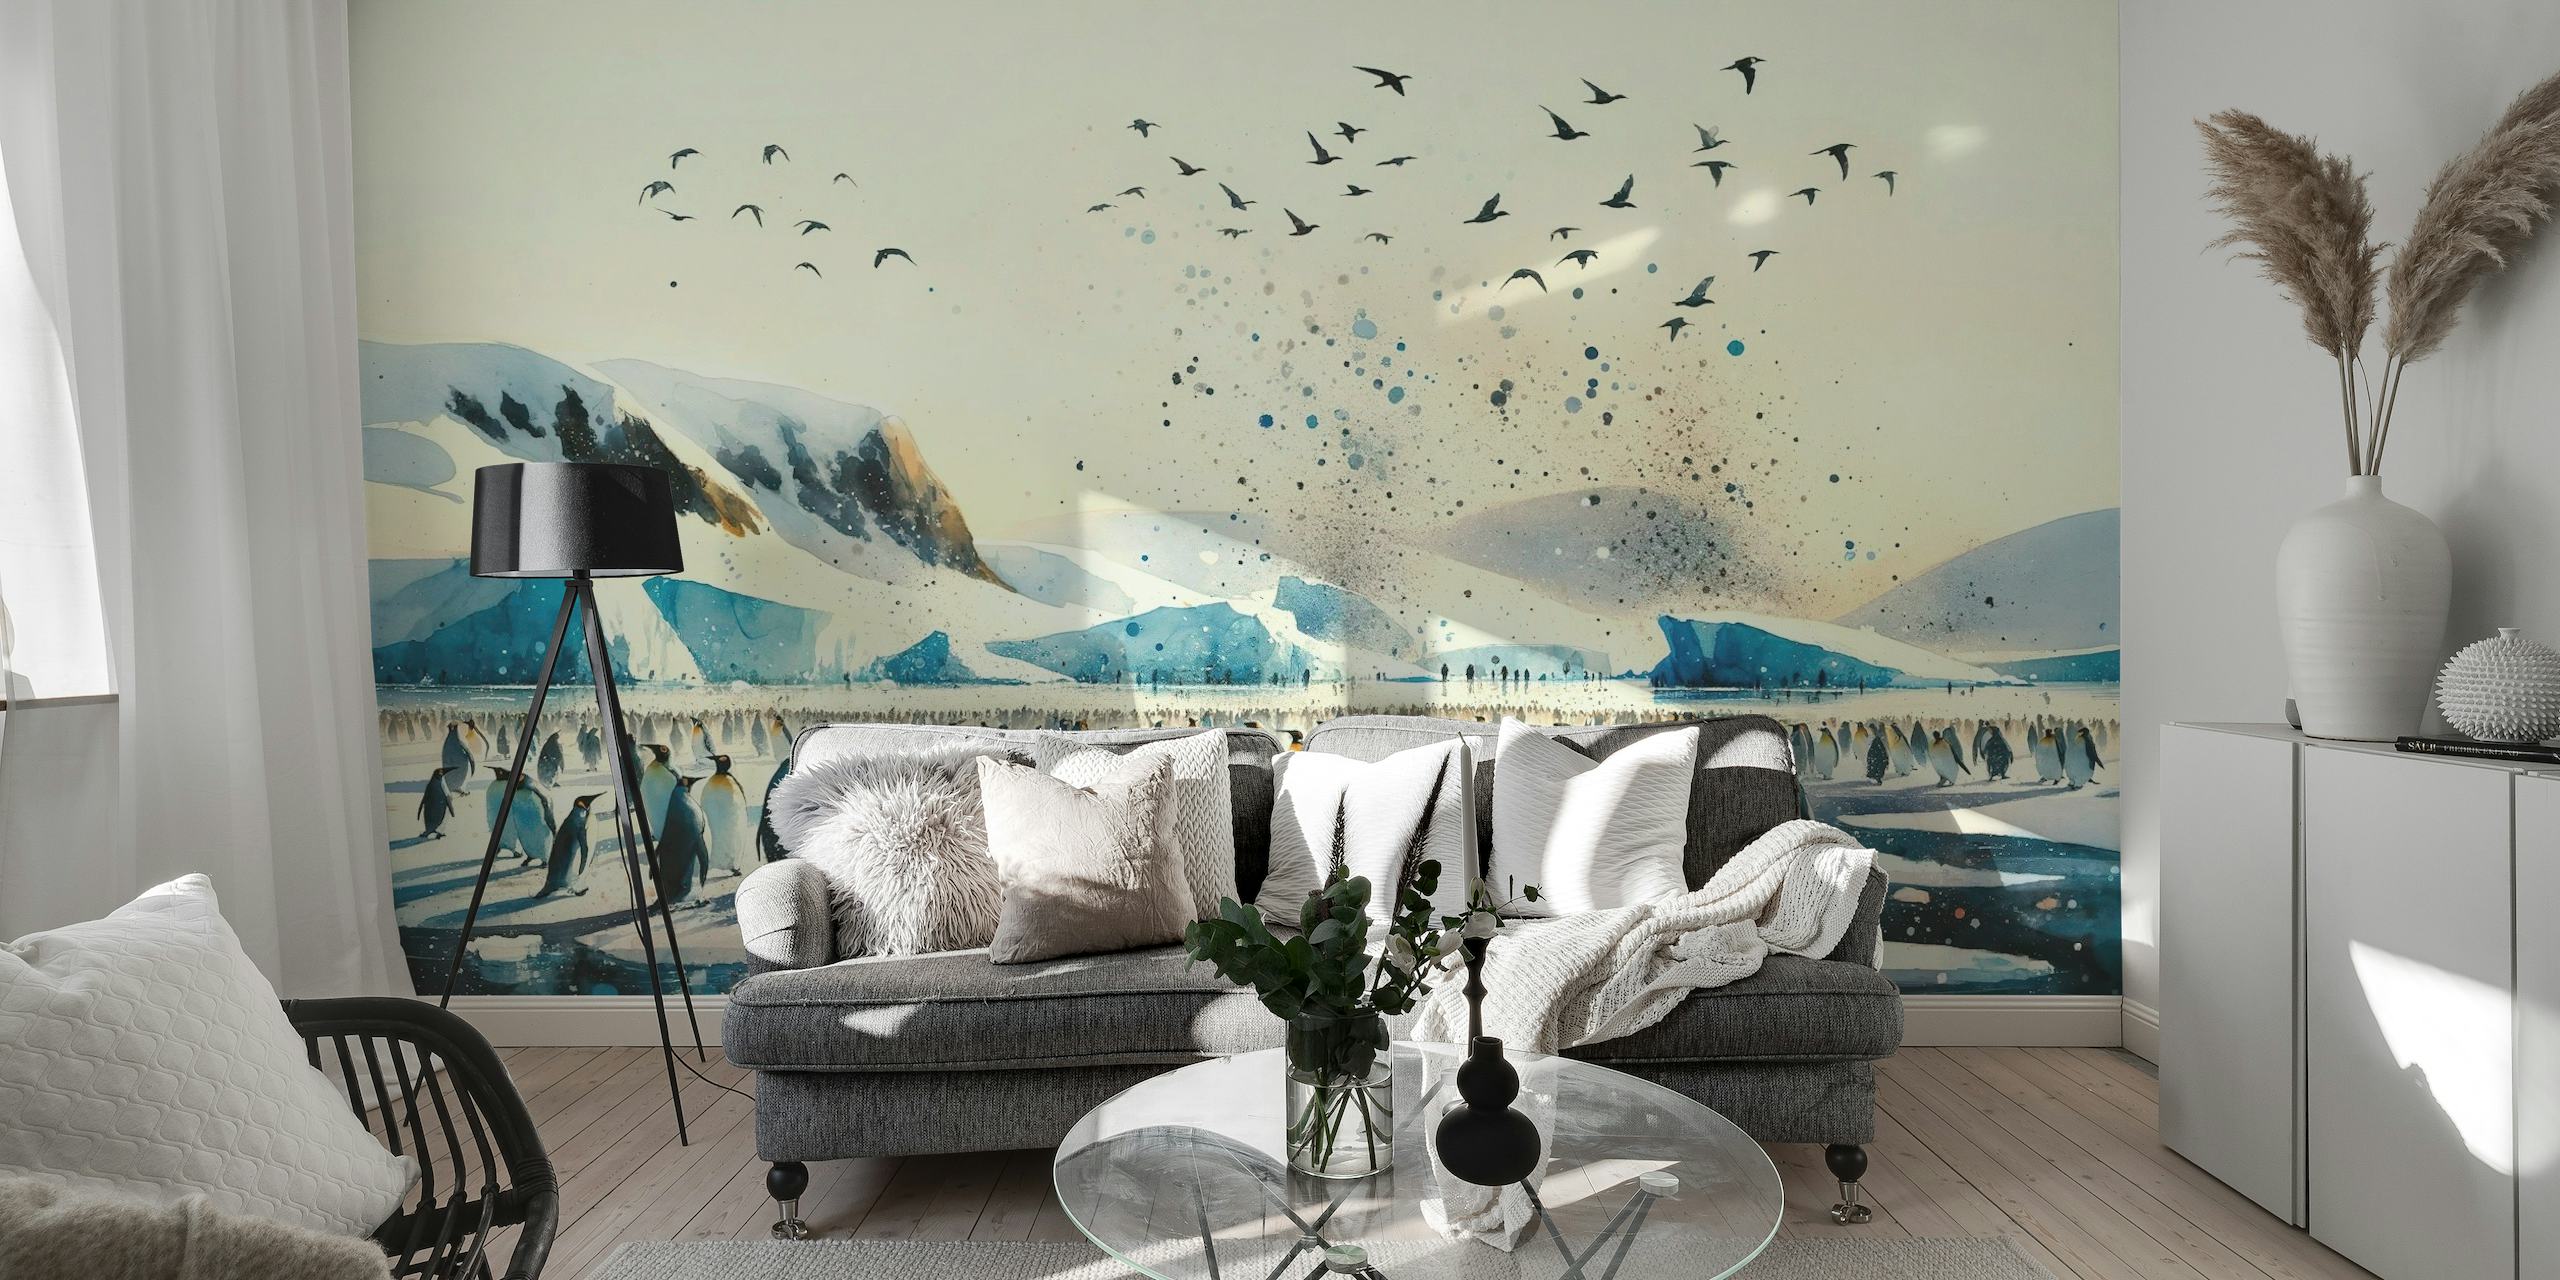 Antarctic landscape with penguins and flying birds wall mural